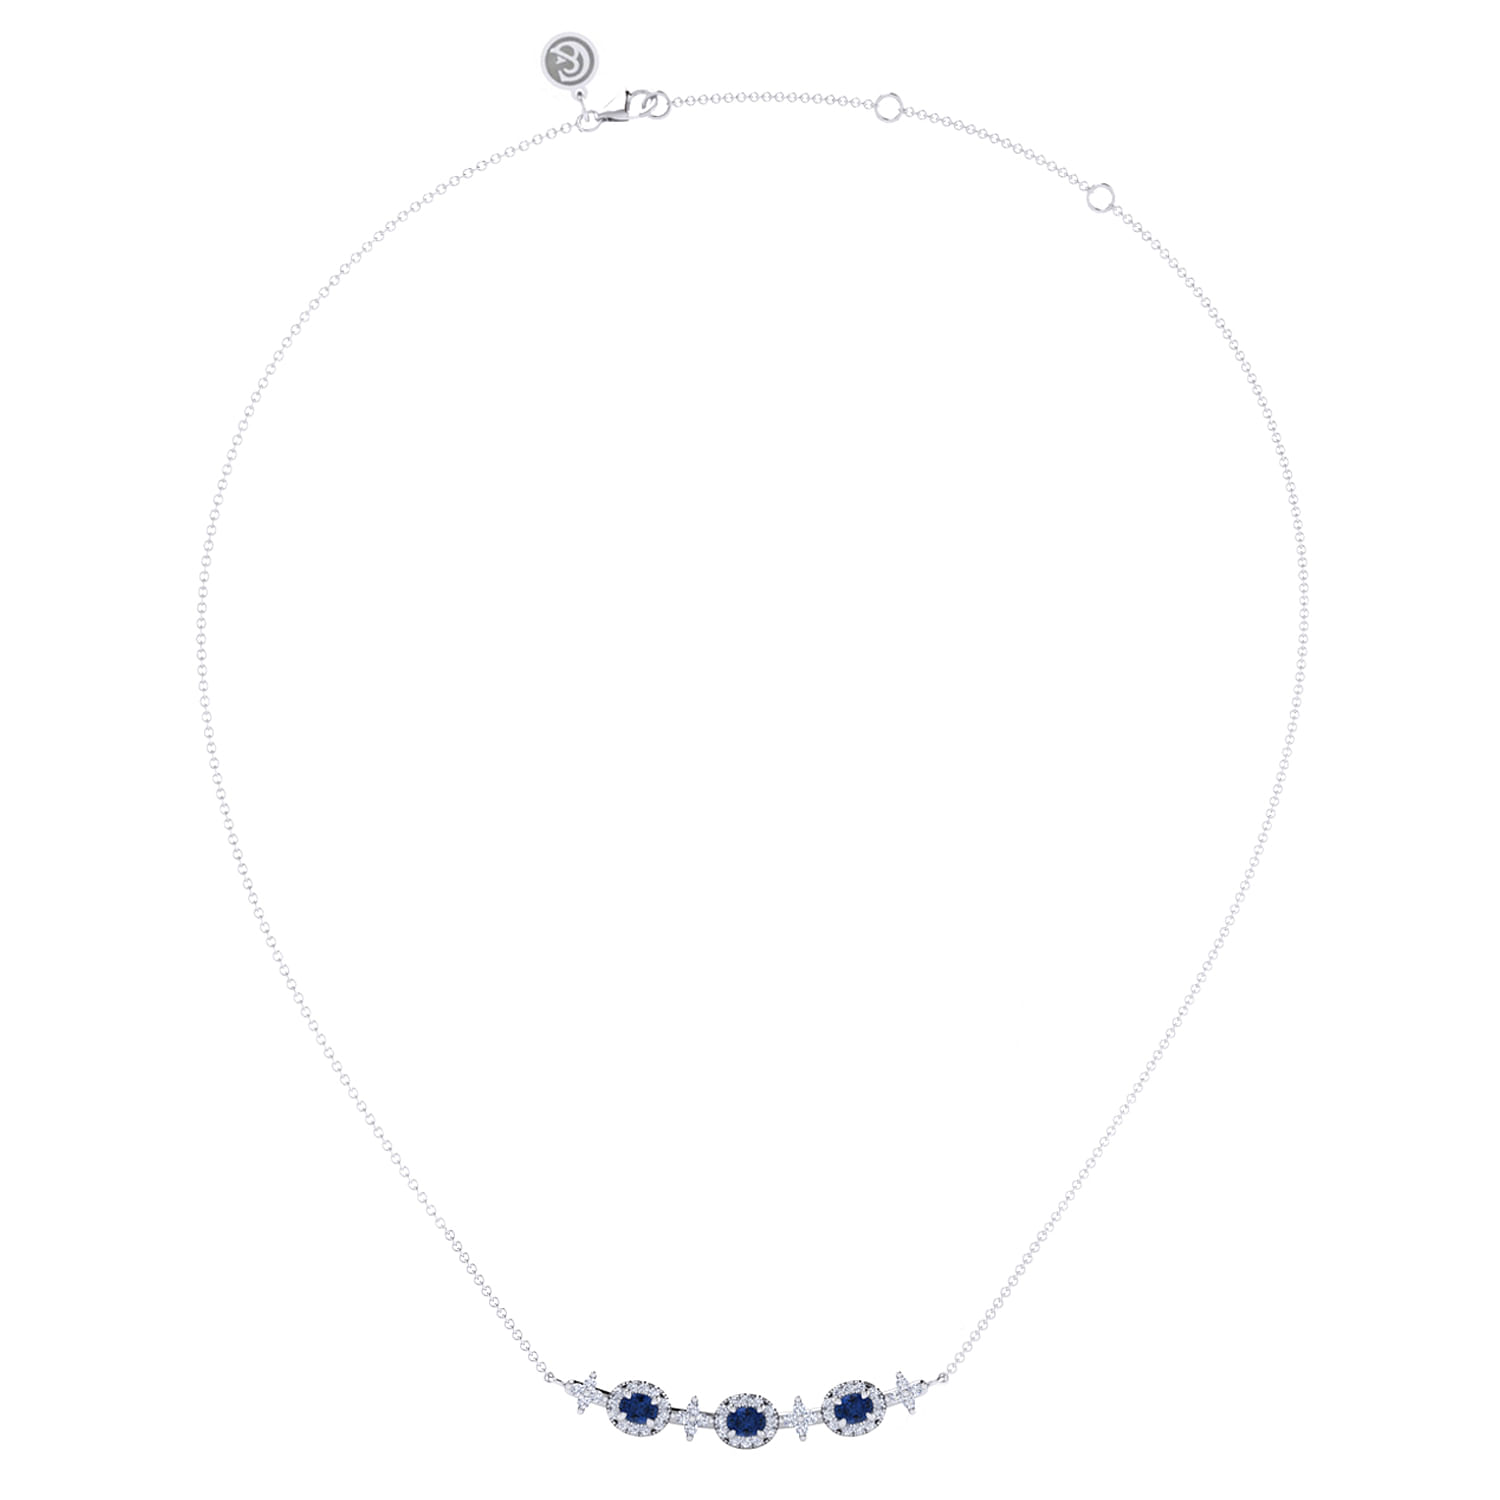 14K White Gold Diamond and Sapphire Bar Necklace